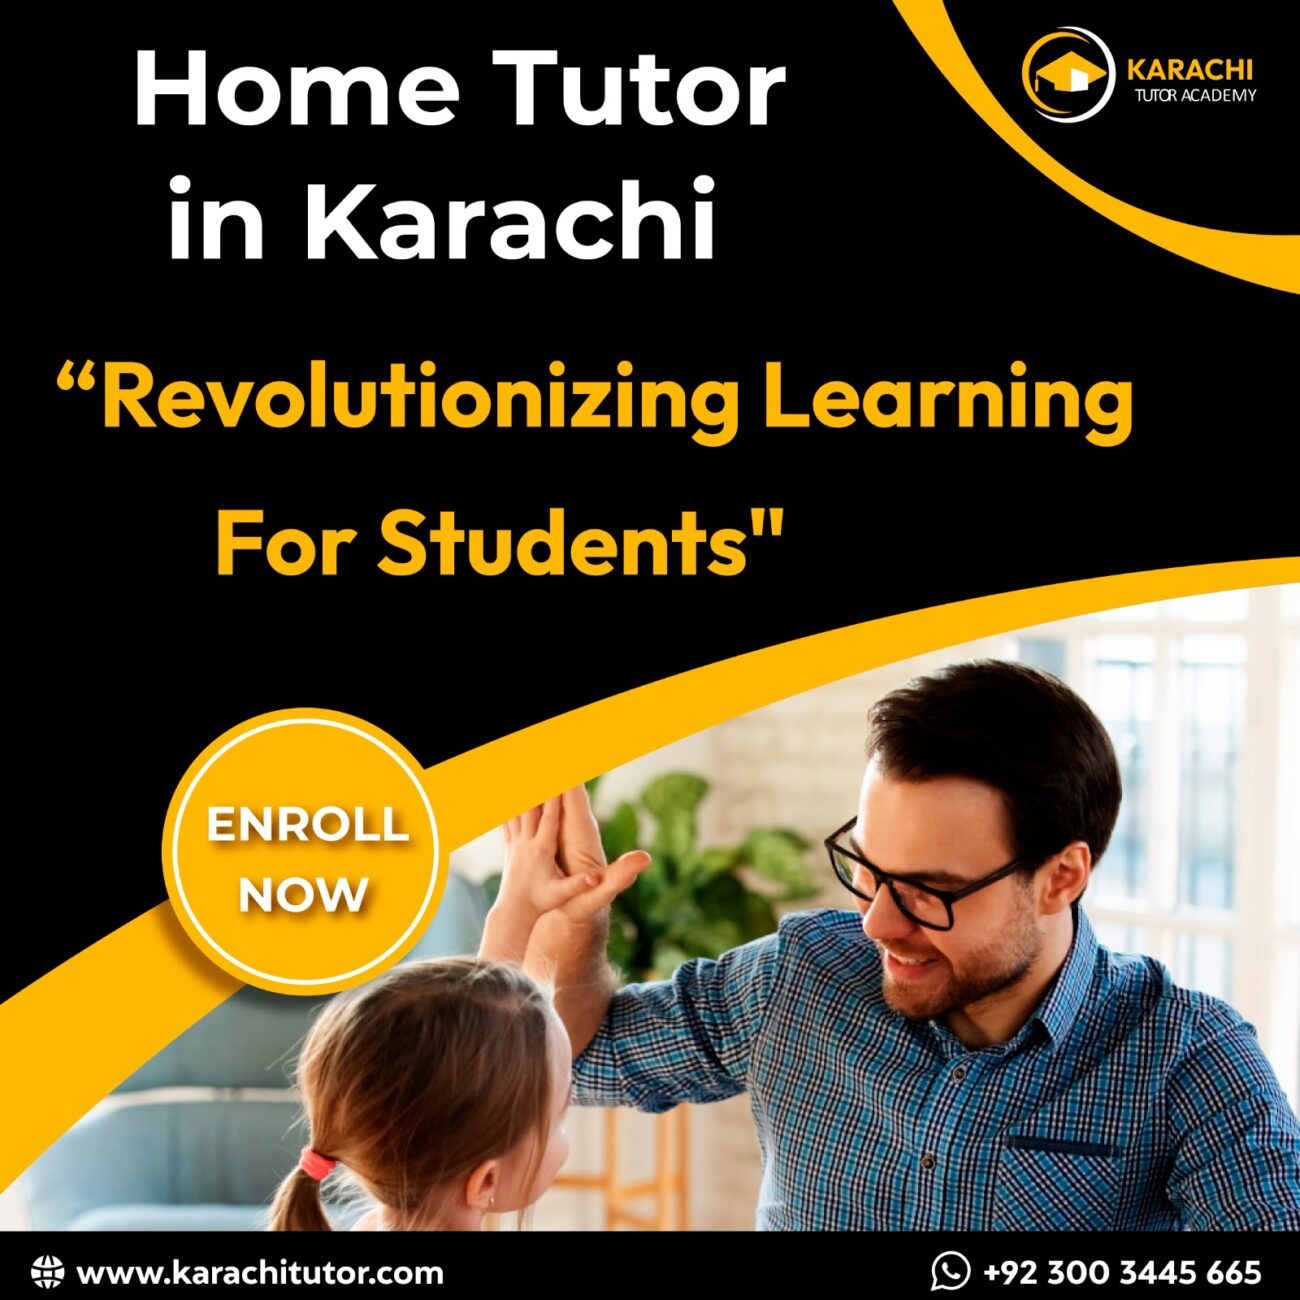 The Benefits of Home Tutoring in Karachi: Personalized Education at Your Doorstep